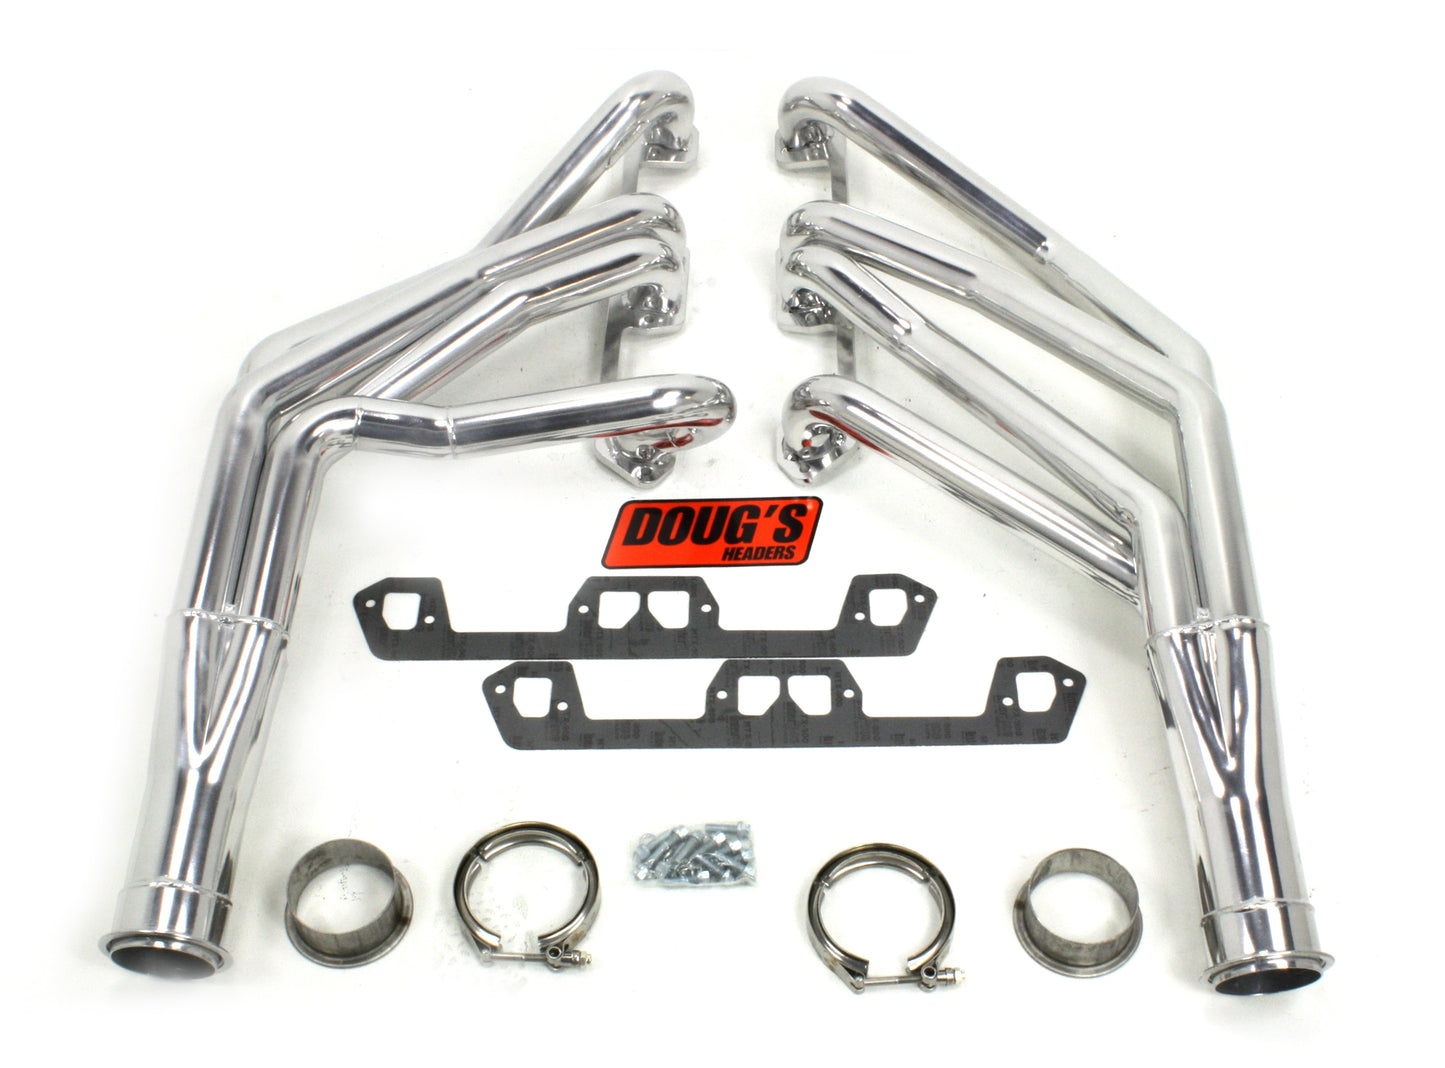 Doug's Headers D454 1 3/4" 4-Tube Full Length Header Mopar A Body Small Block Mopar 63-66 for use with Alter-K-Tion aftermarket replacement K member with V-Band collector flange Metallic Ceramic Coated